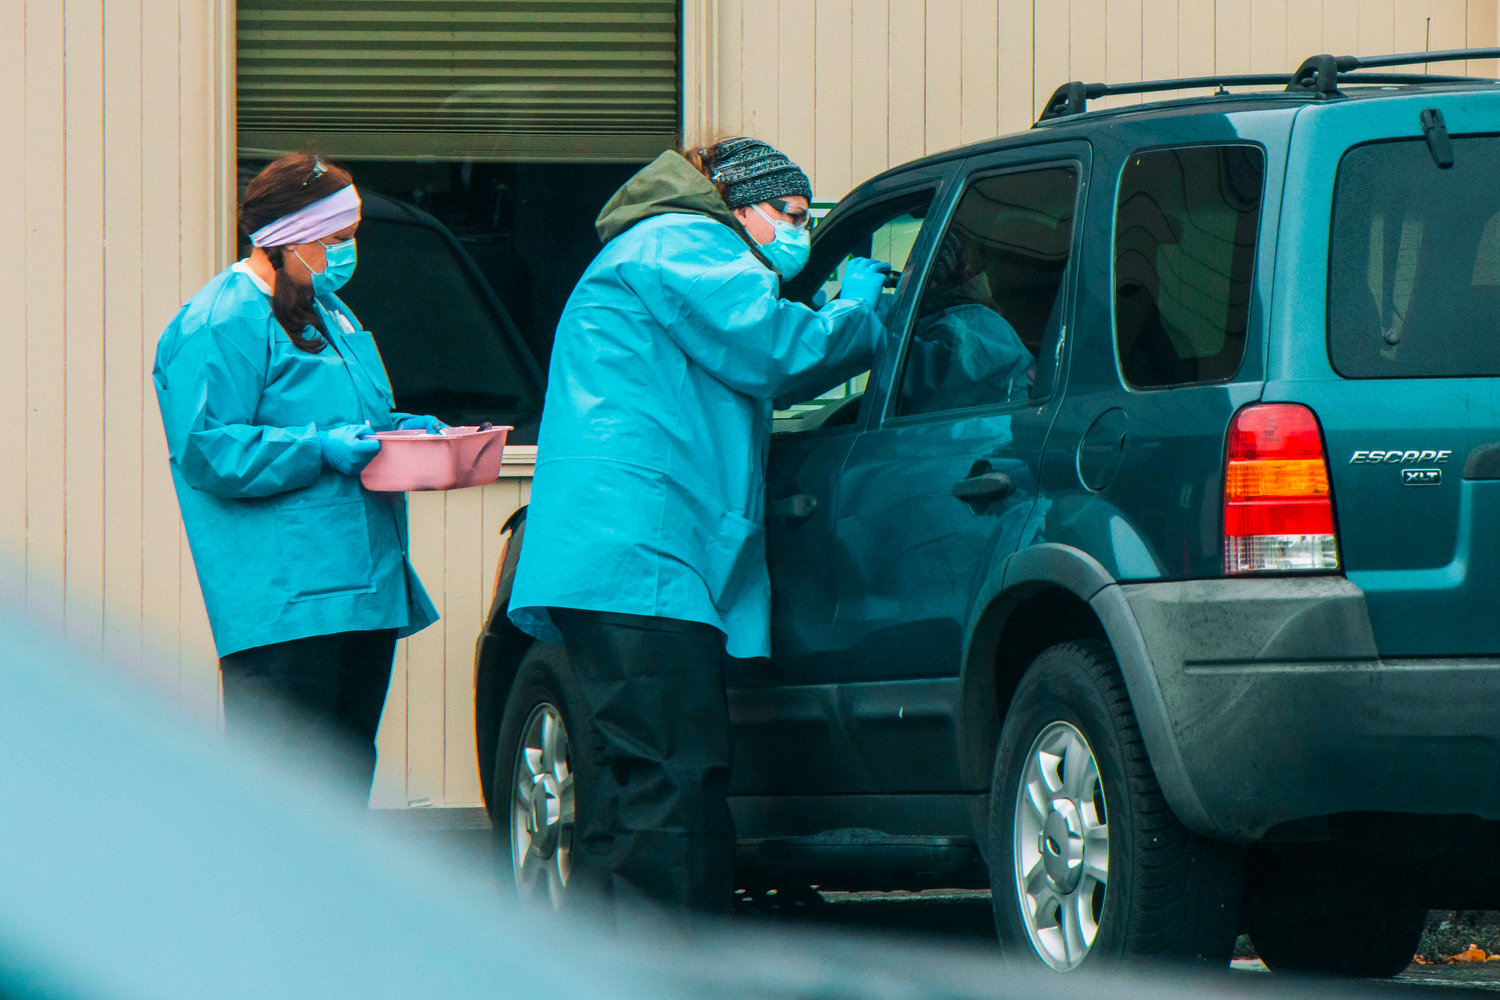 Medical personnel at Valley View Health Center examine a patient at a drive up COVID-19 testing site last year.